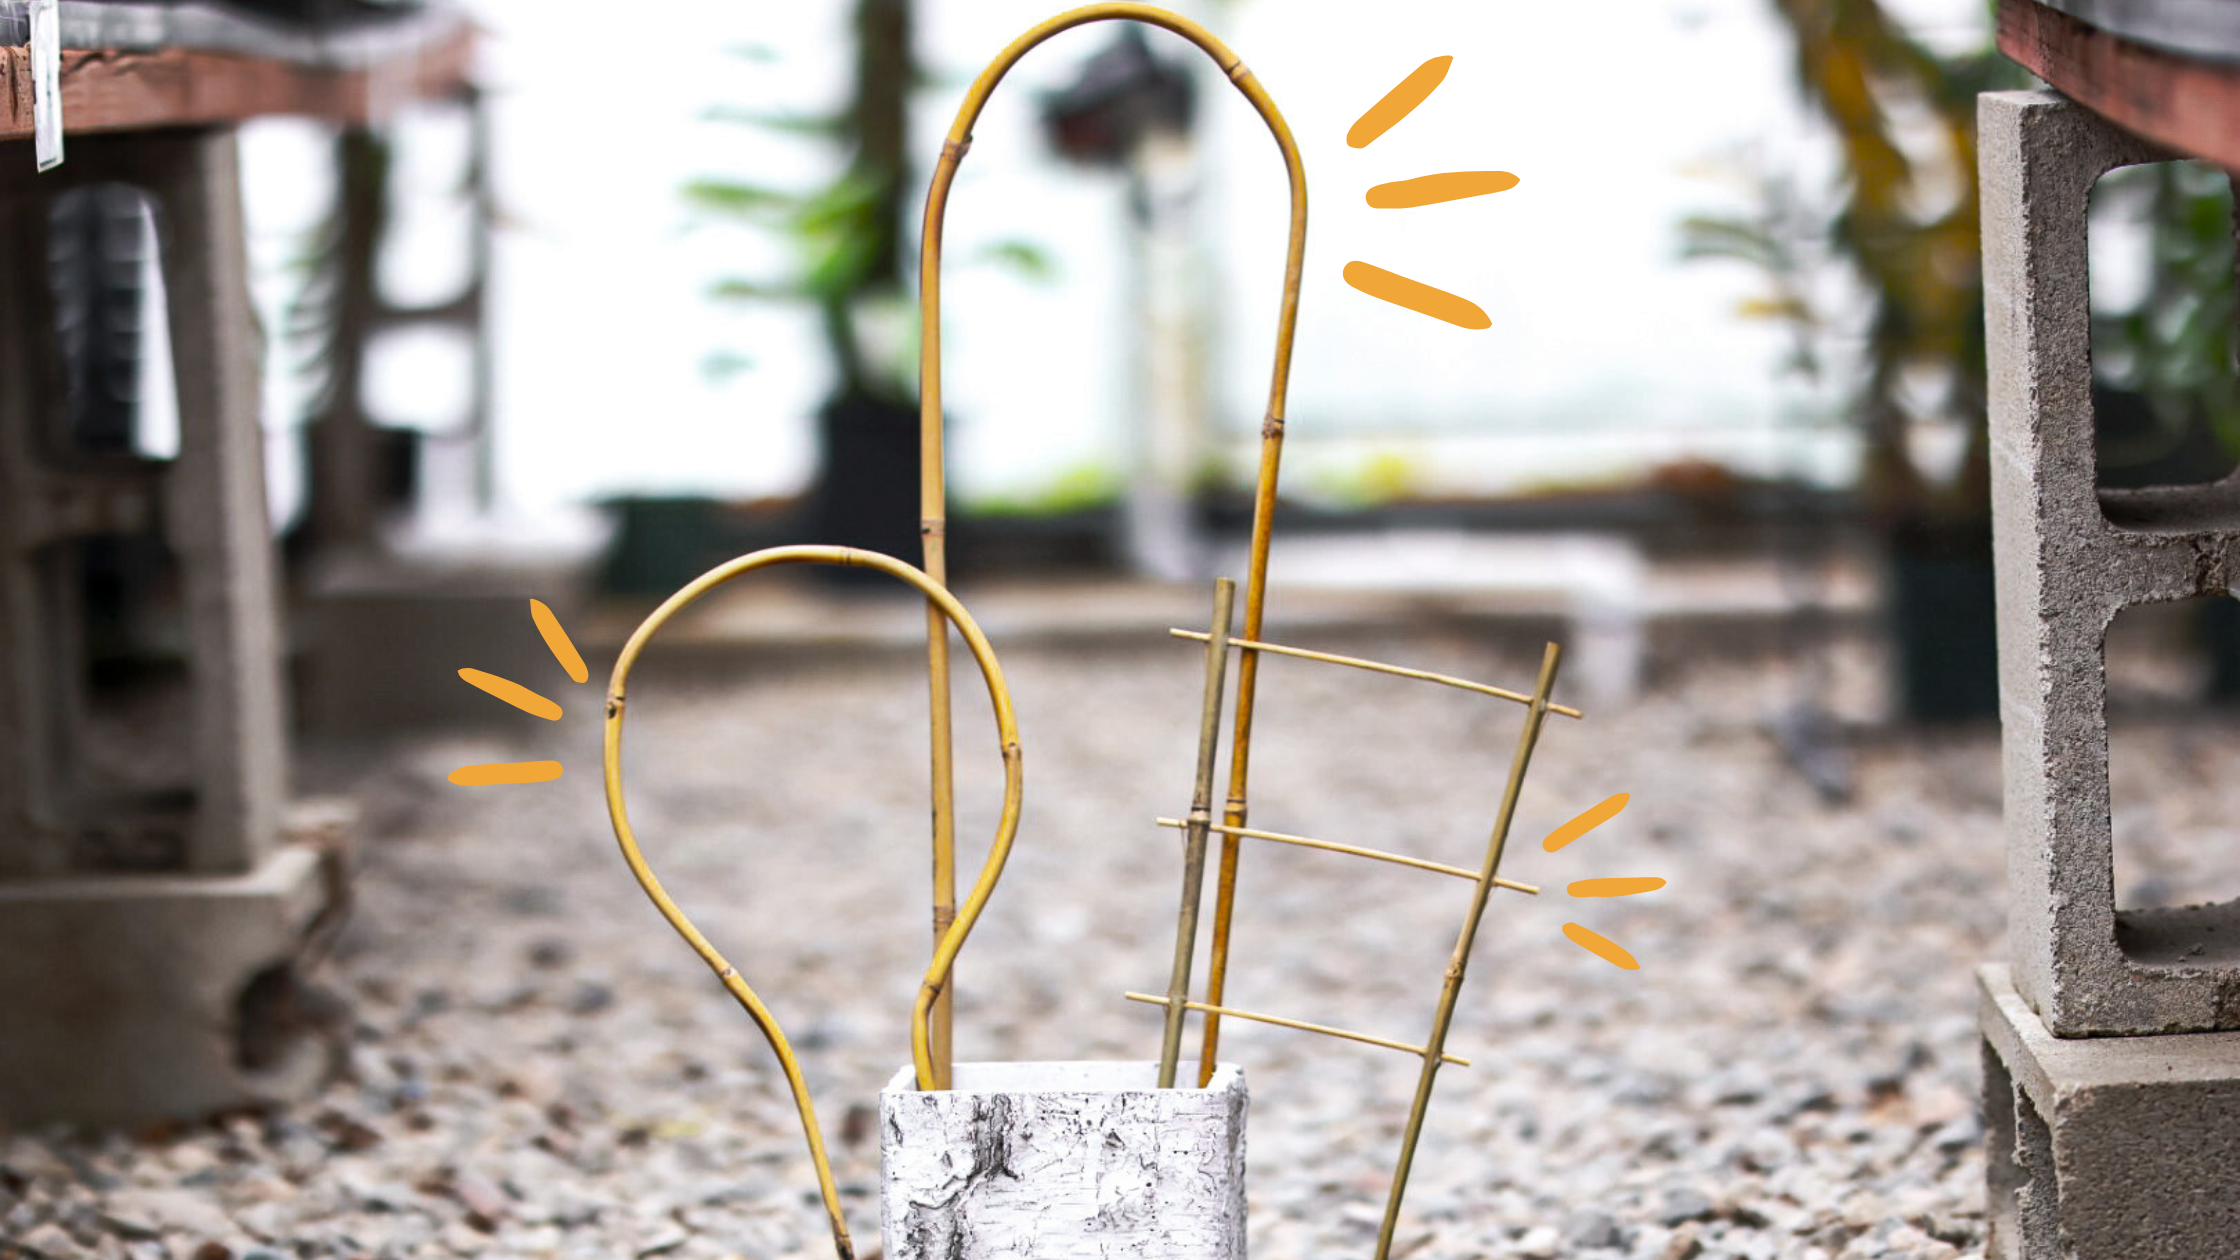 Metal, Wire and Wood Flowers From TikTok